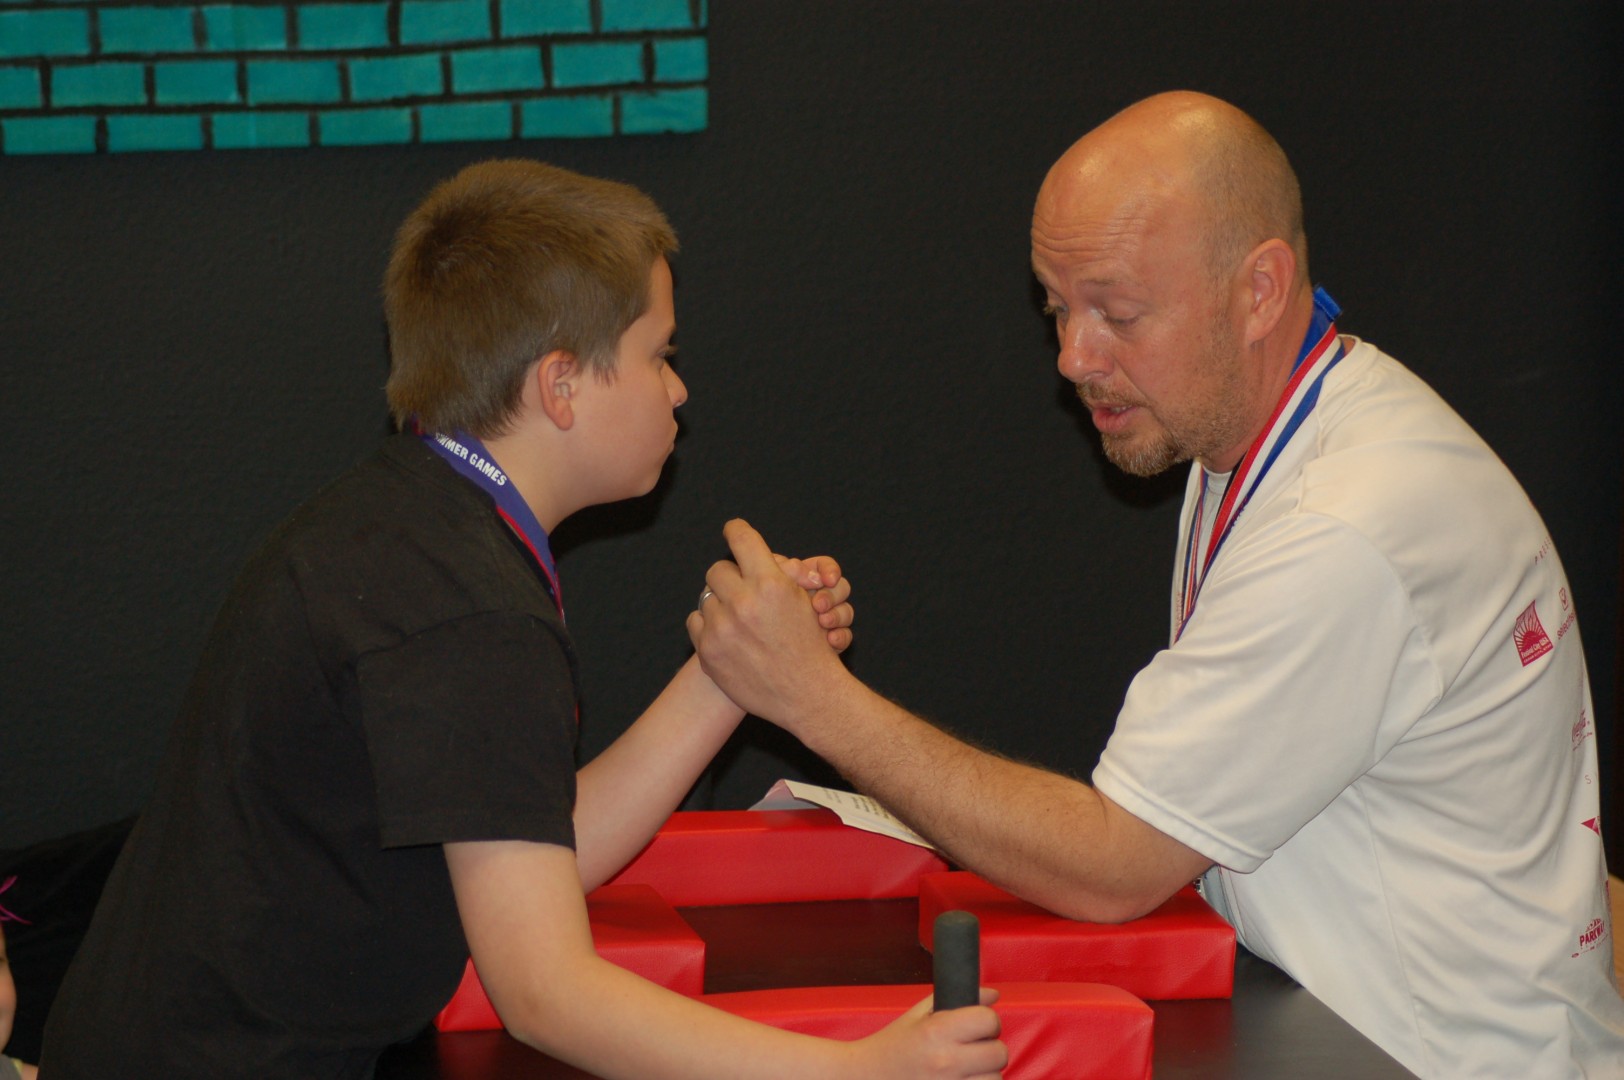 Jarett Kirby and Jeff Kirby demonstrate to the students the proper form for arm wrestling at an assembly held at Bloomington Elementary, St. George, Utah, April 4, 2014 | Photo by Hollie Reina, St. George News